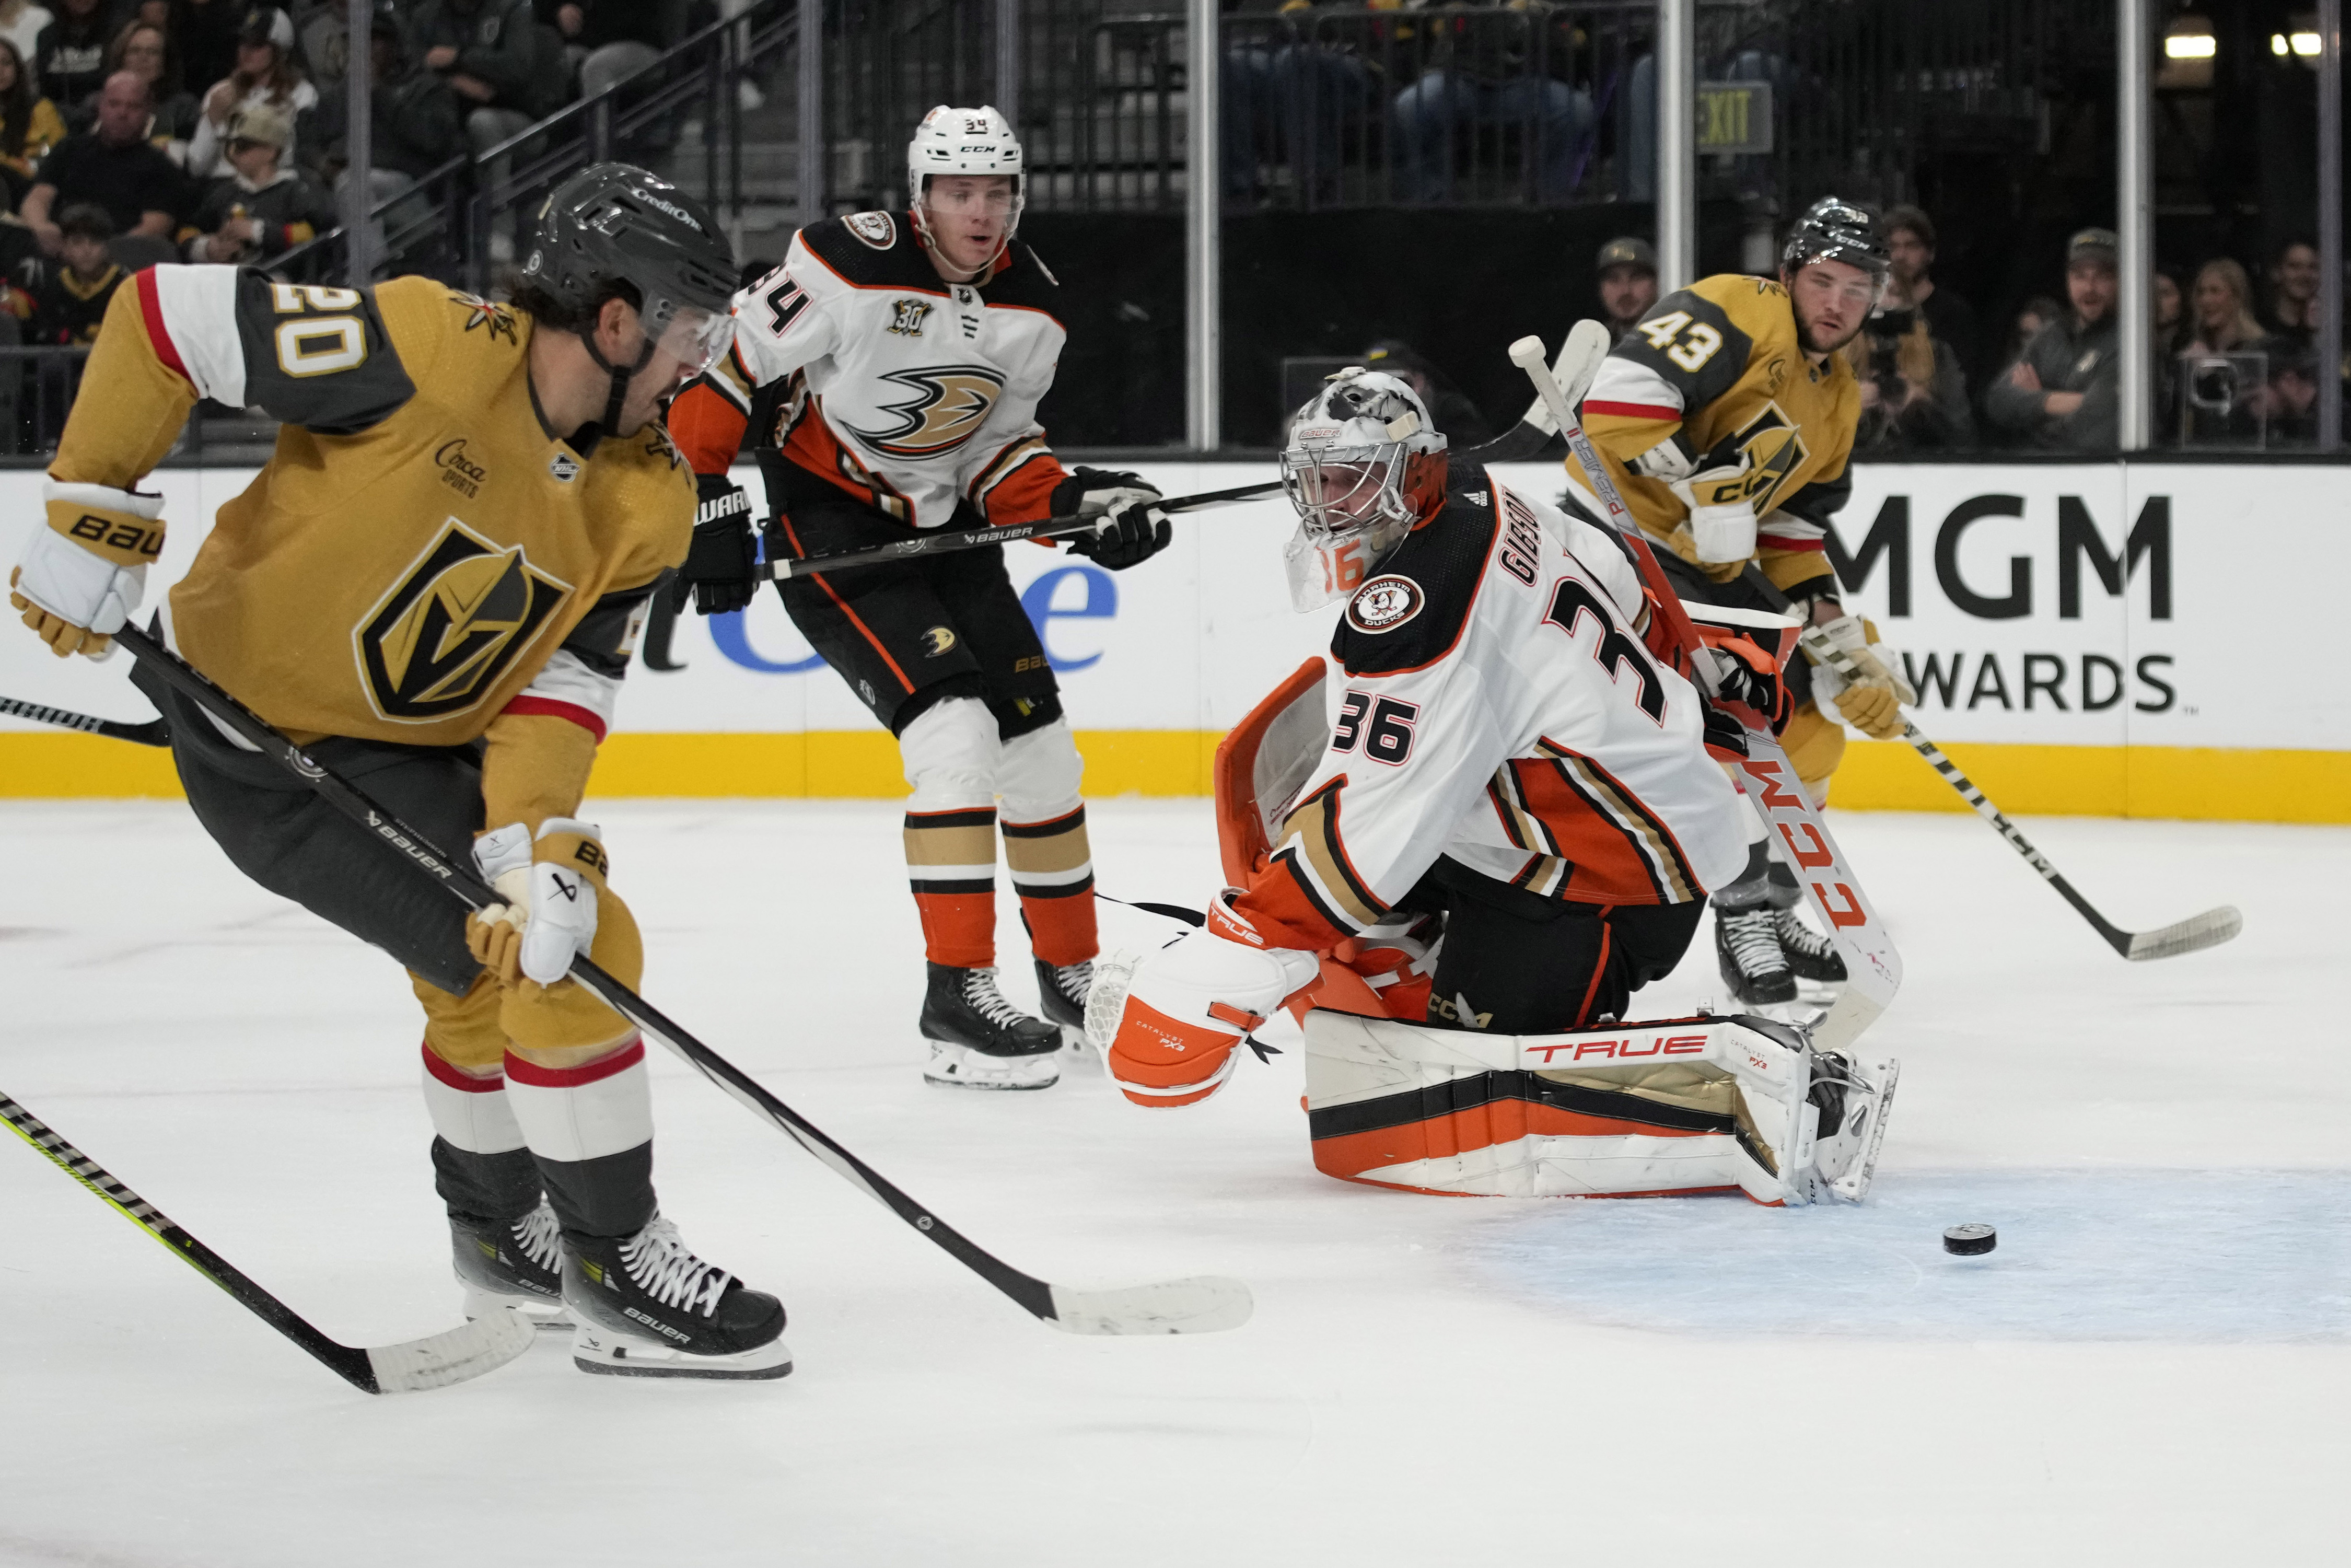 Vatrano scores 3 goals, Mintyukov gets first NHL goal as Ducks defeat  Hurricanes 6-3 in home opener